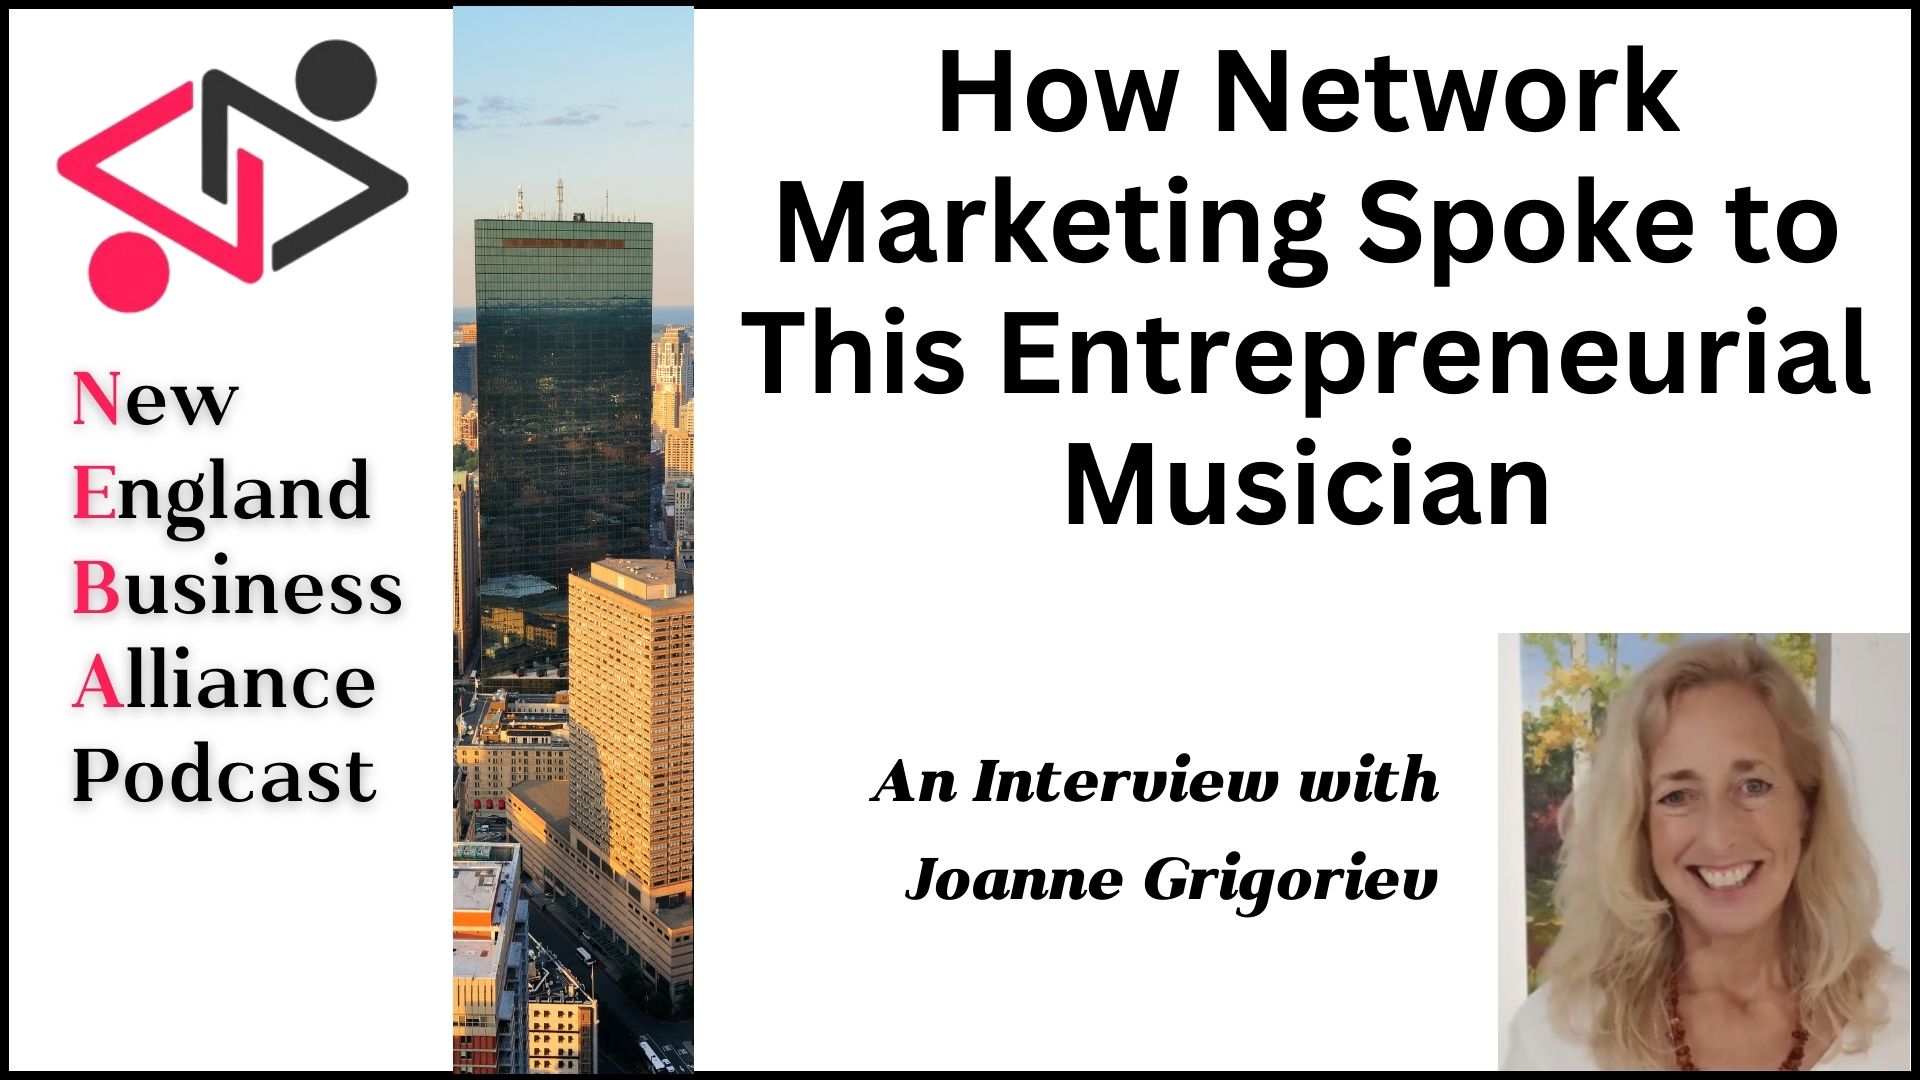 Podcast – How Network Marketing Spoke to This Entrepreneurial Musician